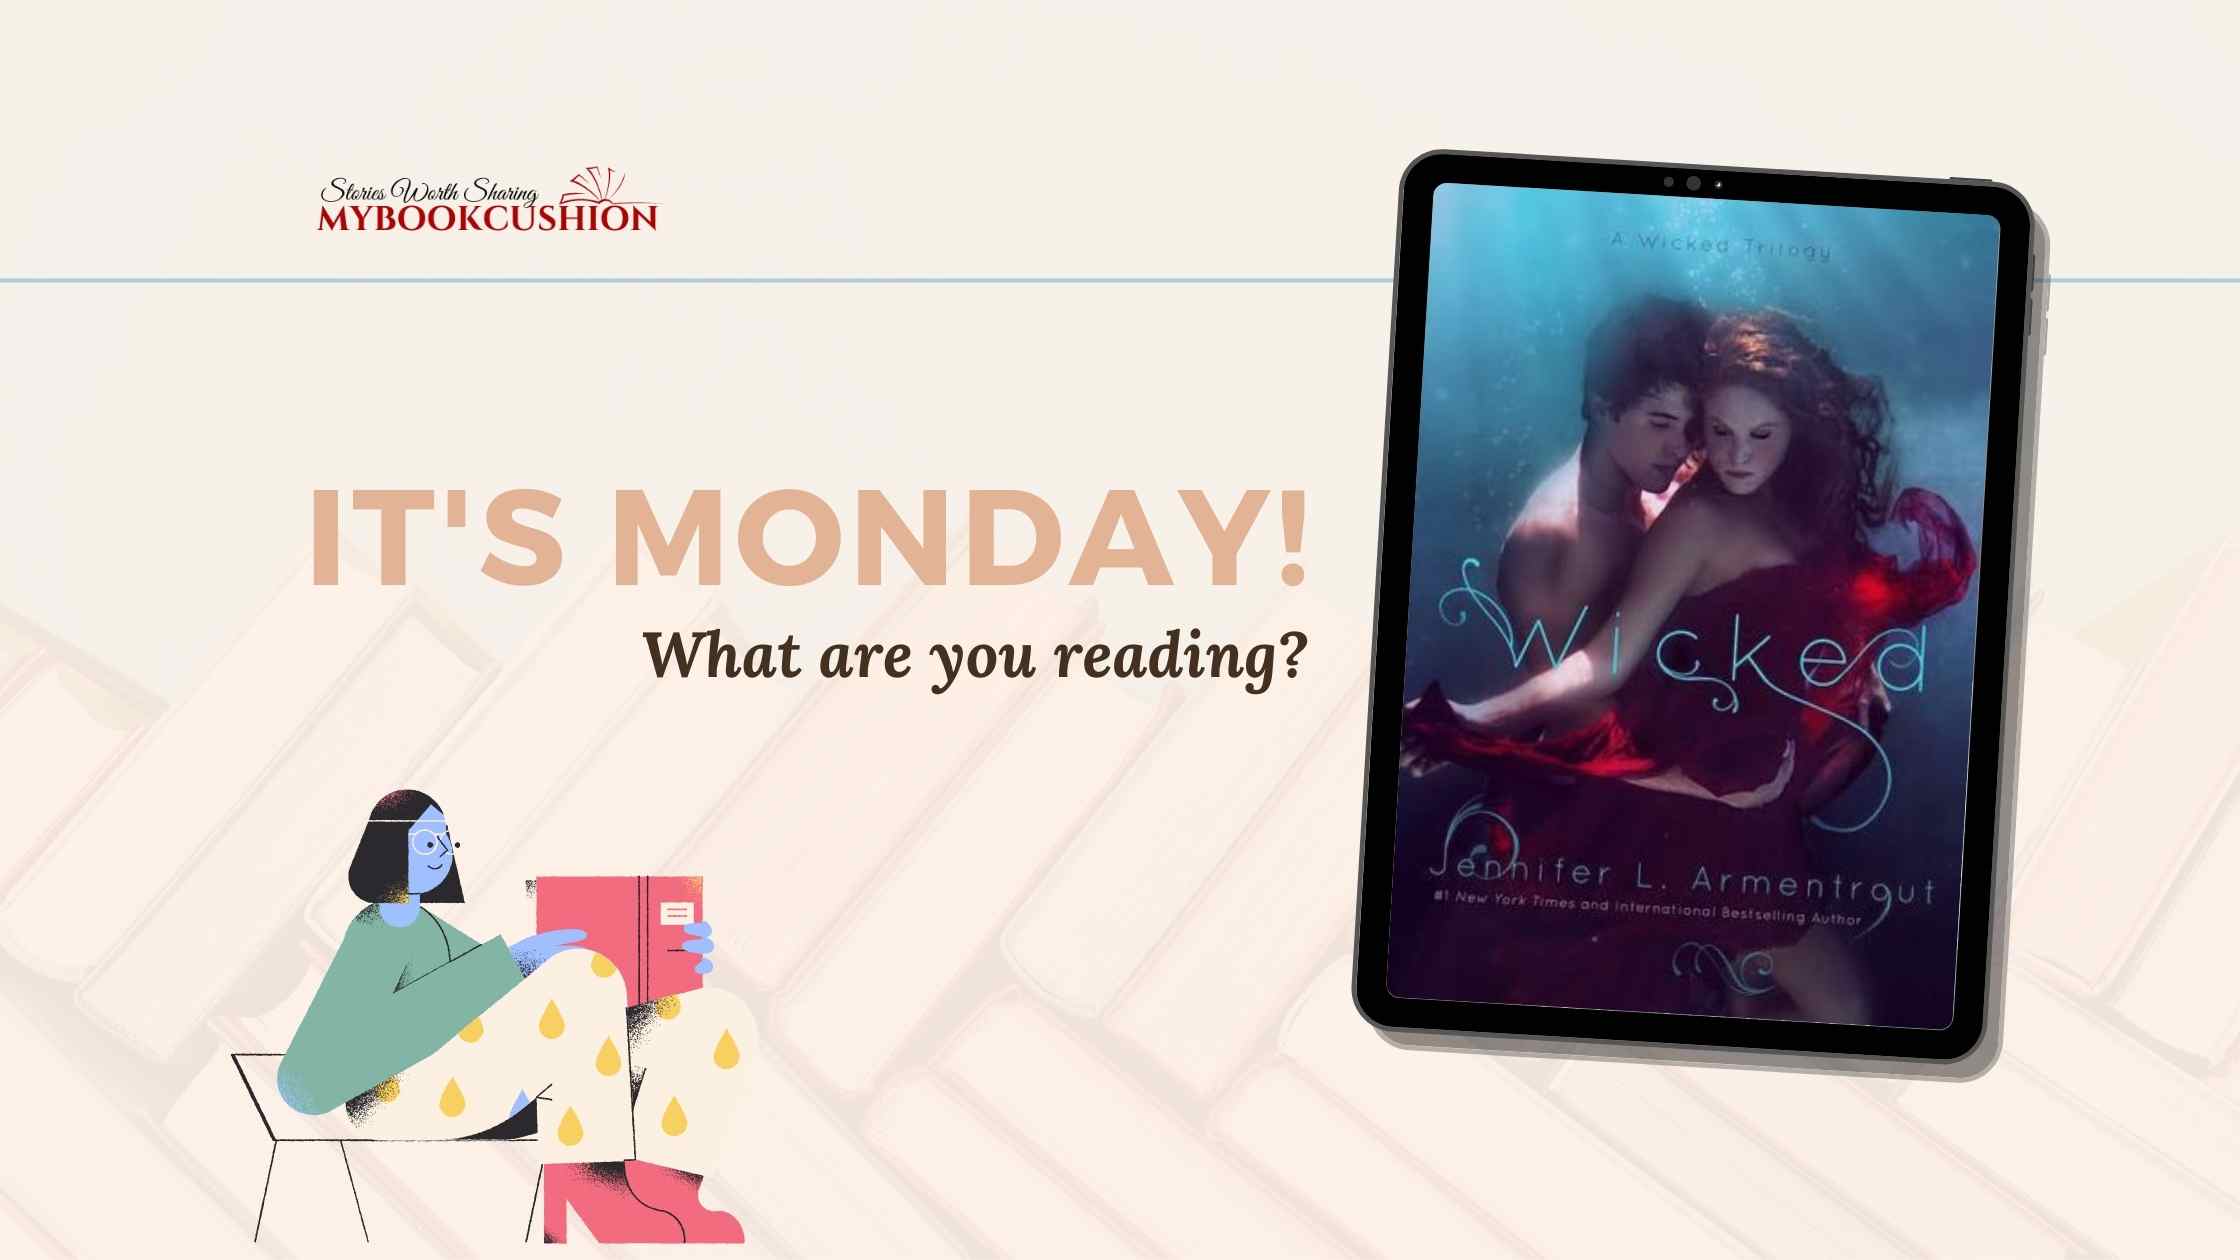 Monday Reads: Wicked by Jennifer Armentrout